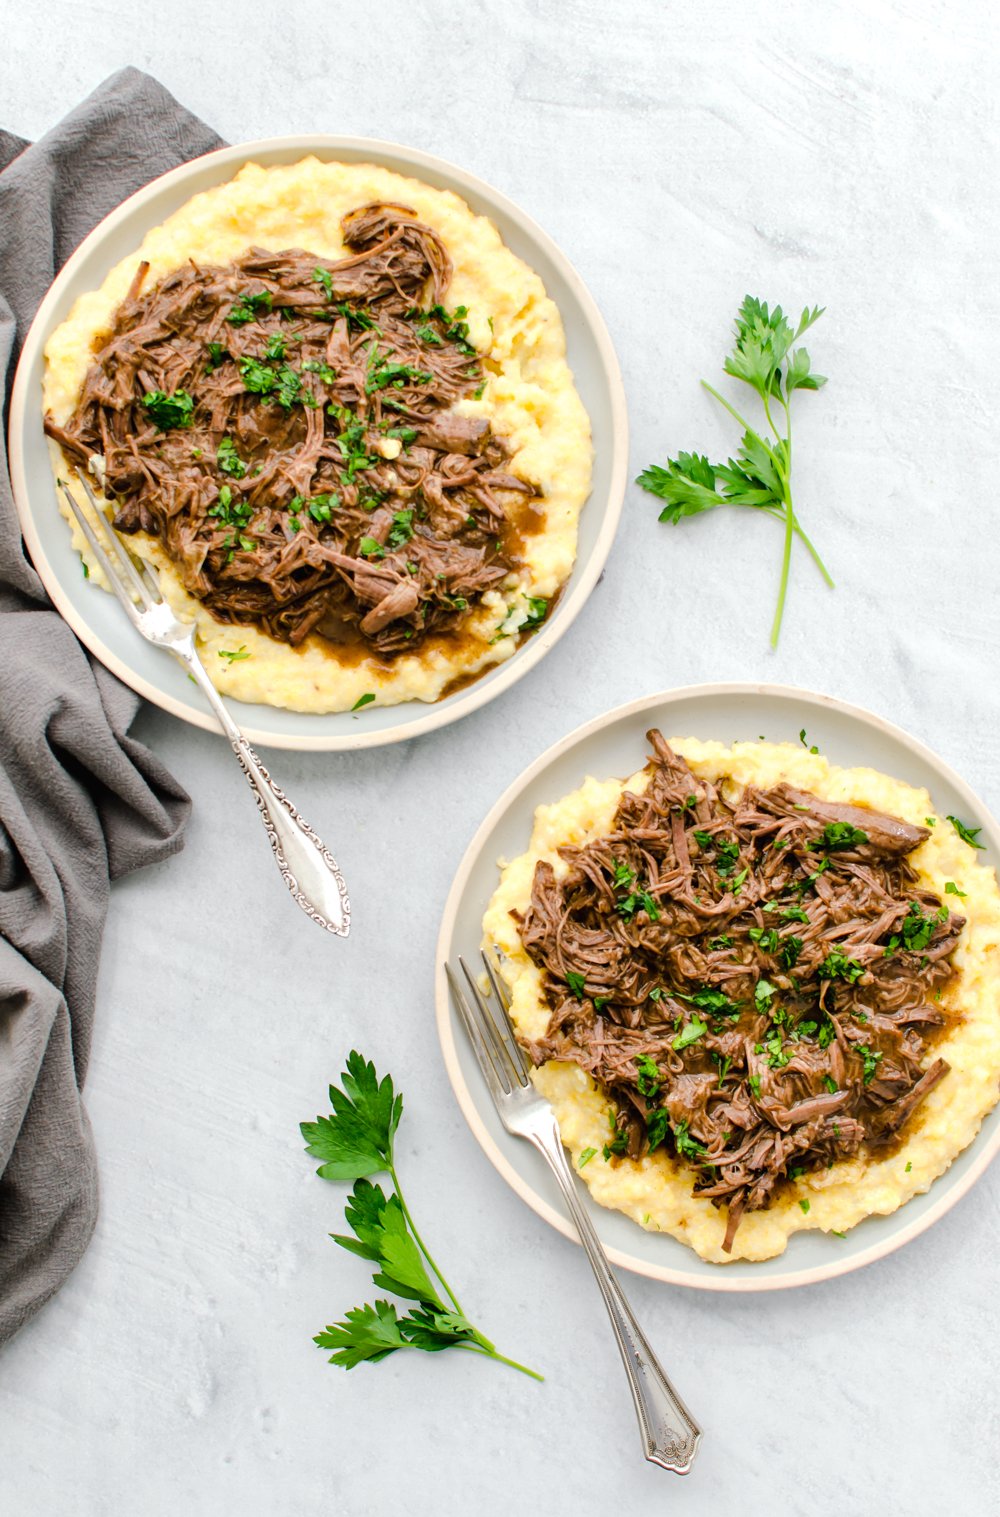 Balsamic shredded beef and sauce over polenta on two plates.